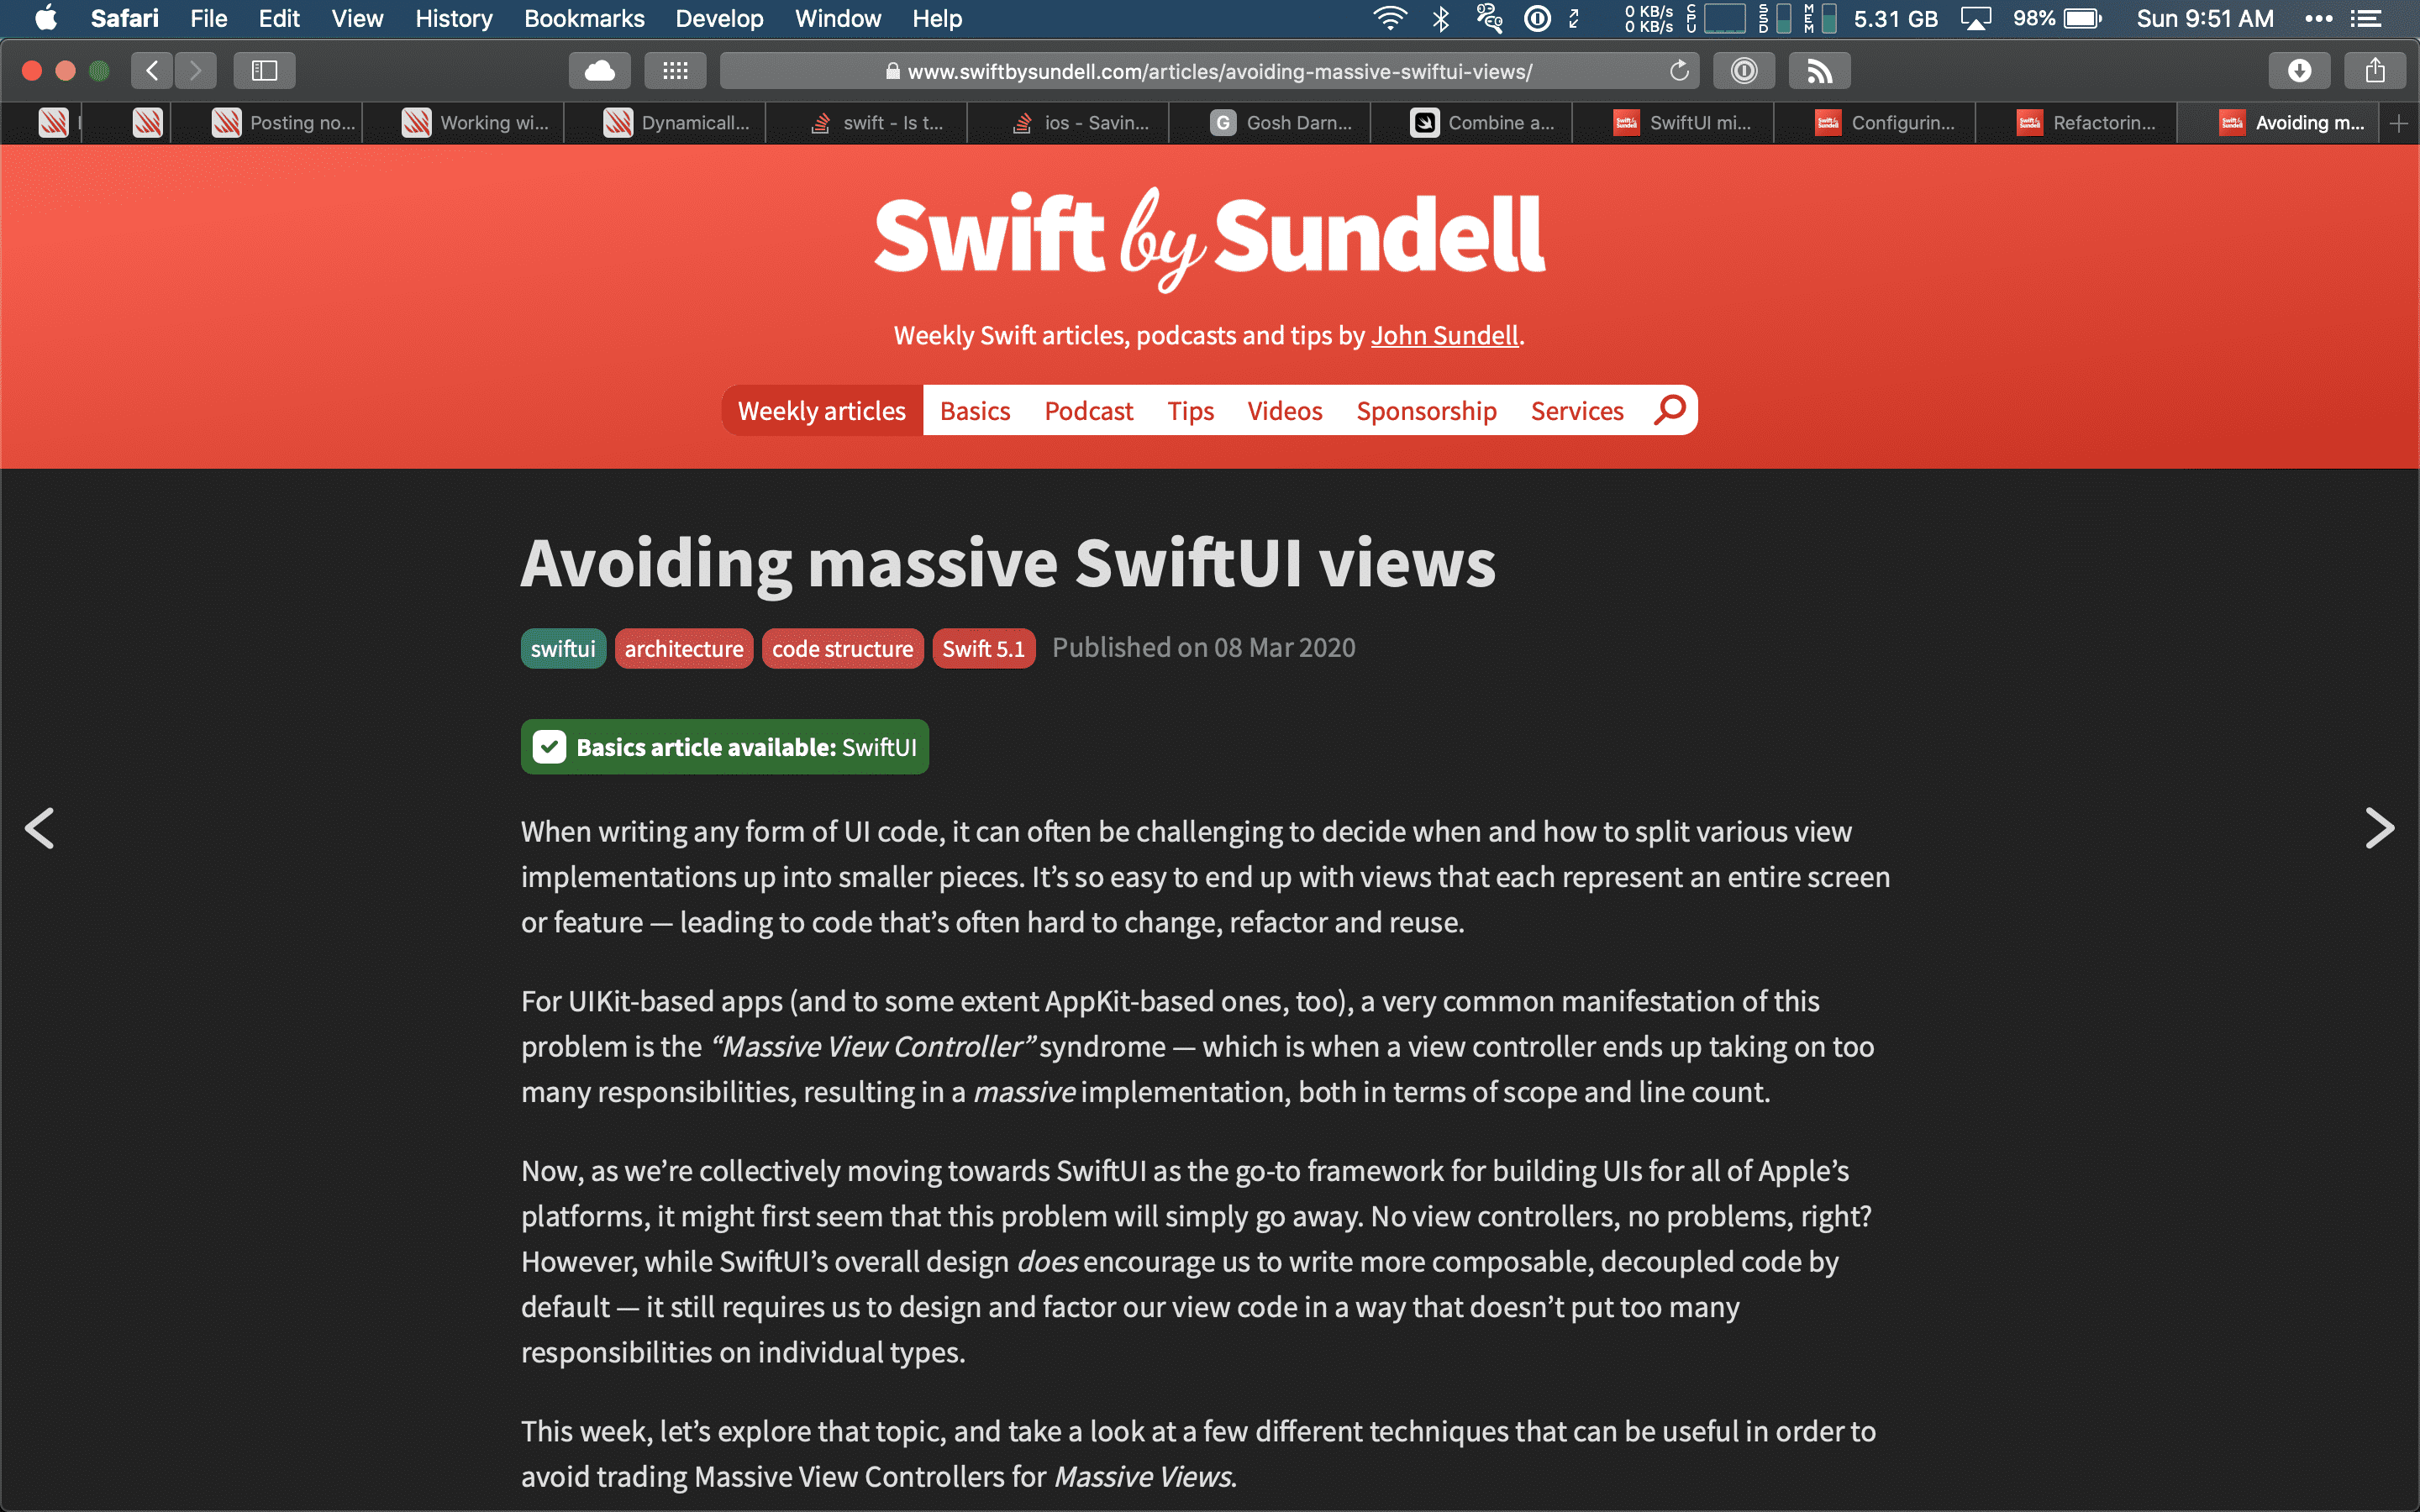 A screenshot of many SwiftUI browser tabs opened at once